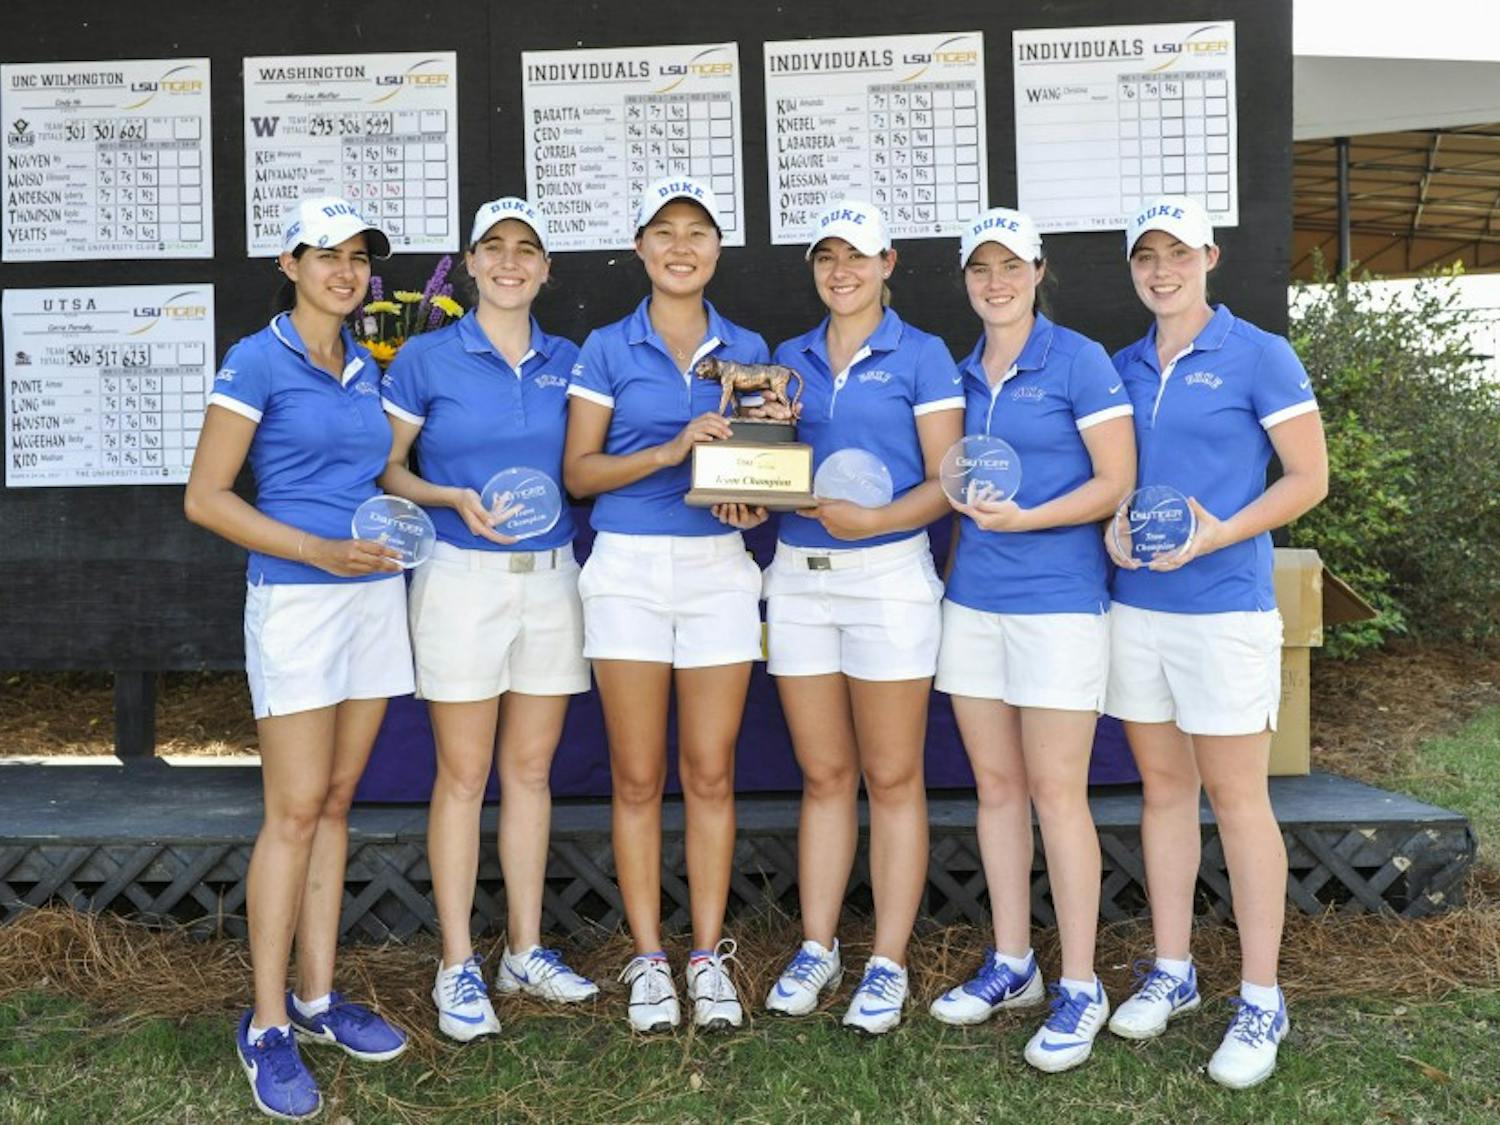 The Blue Devils won their first stroke-play title of 2016-17 and look to be playing their best golf of the year with the postseason around the corner.